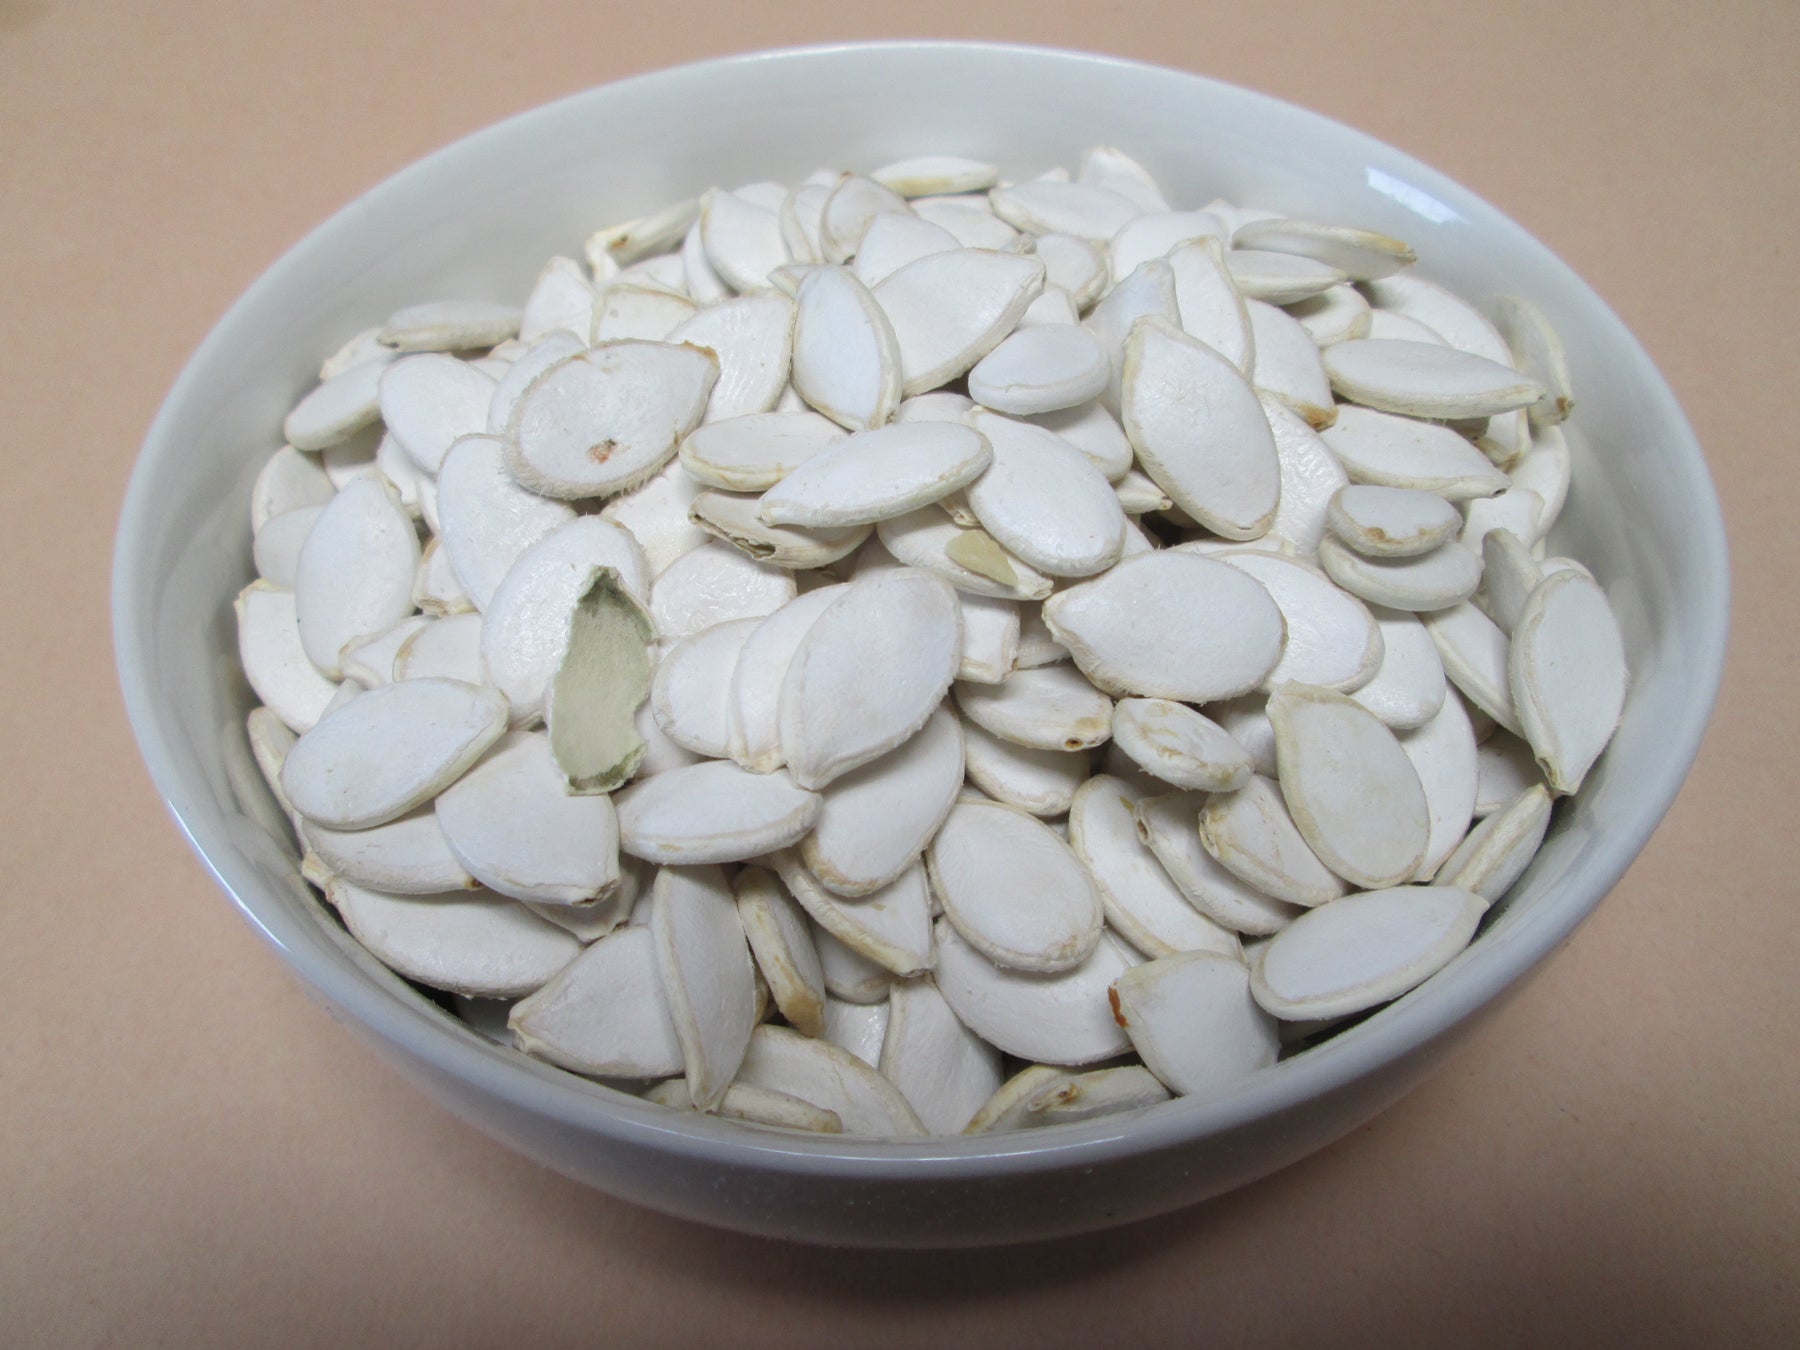 Roasted White Pumpkin Seeds In Shell, 25 lbs / case